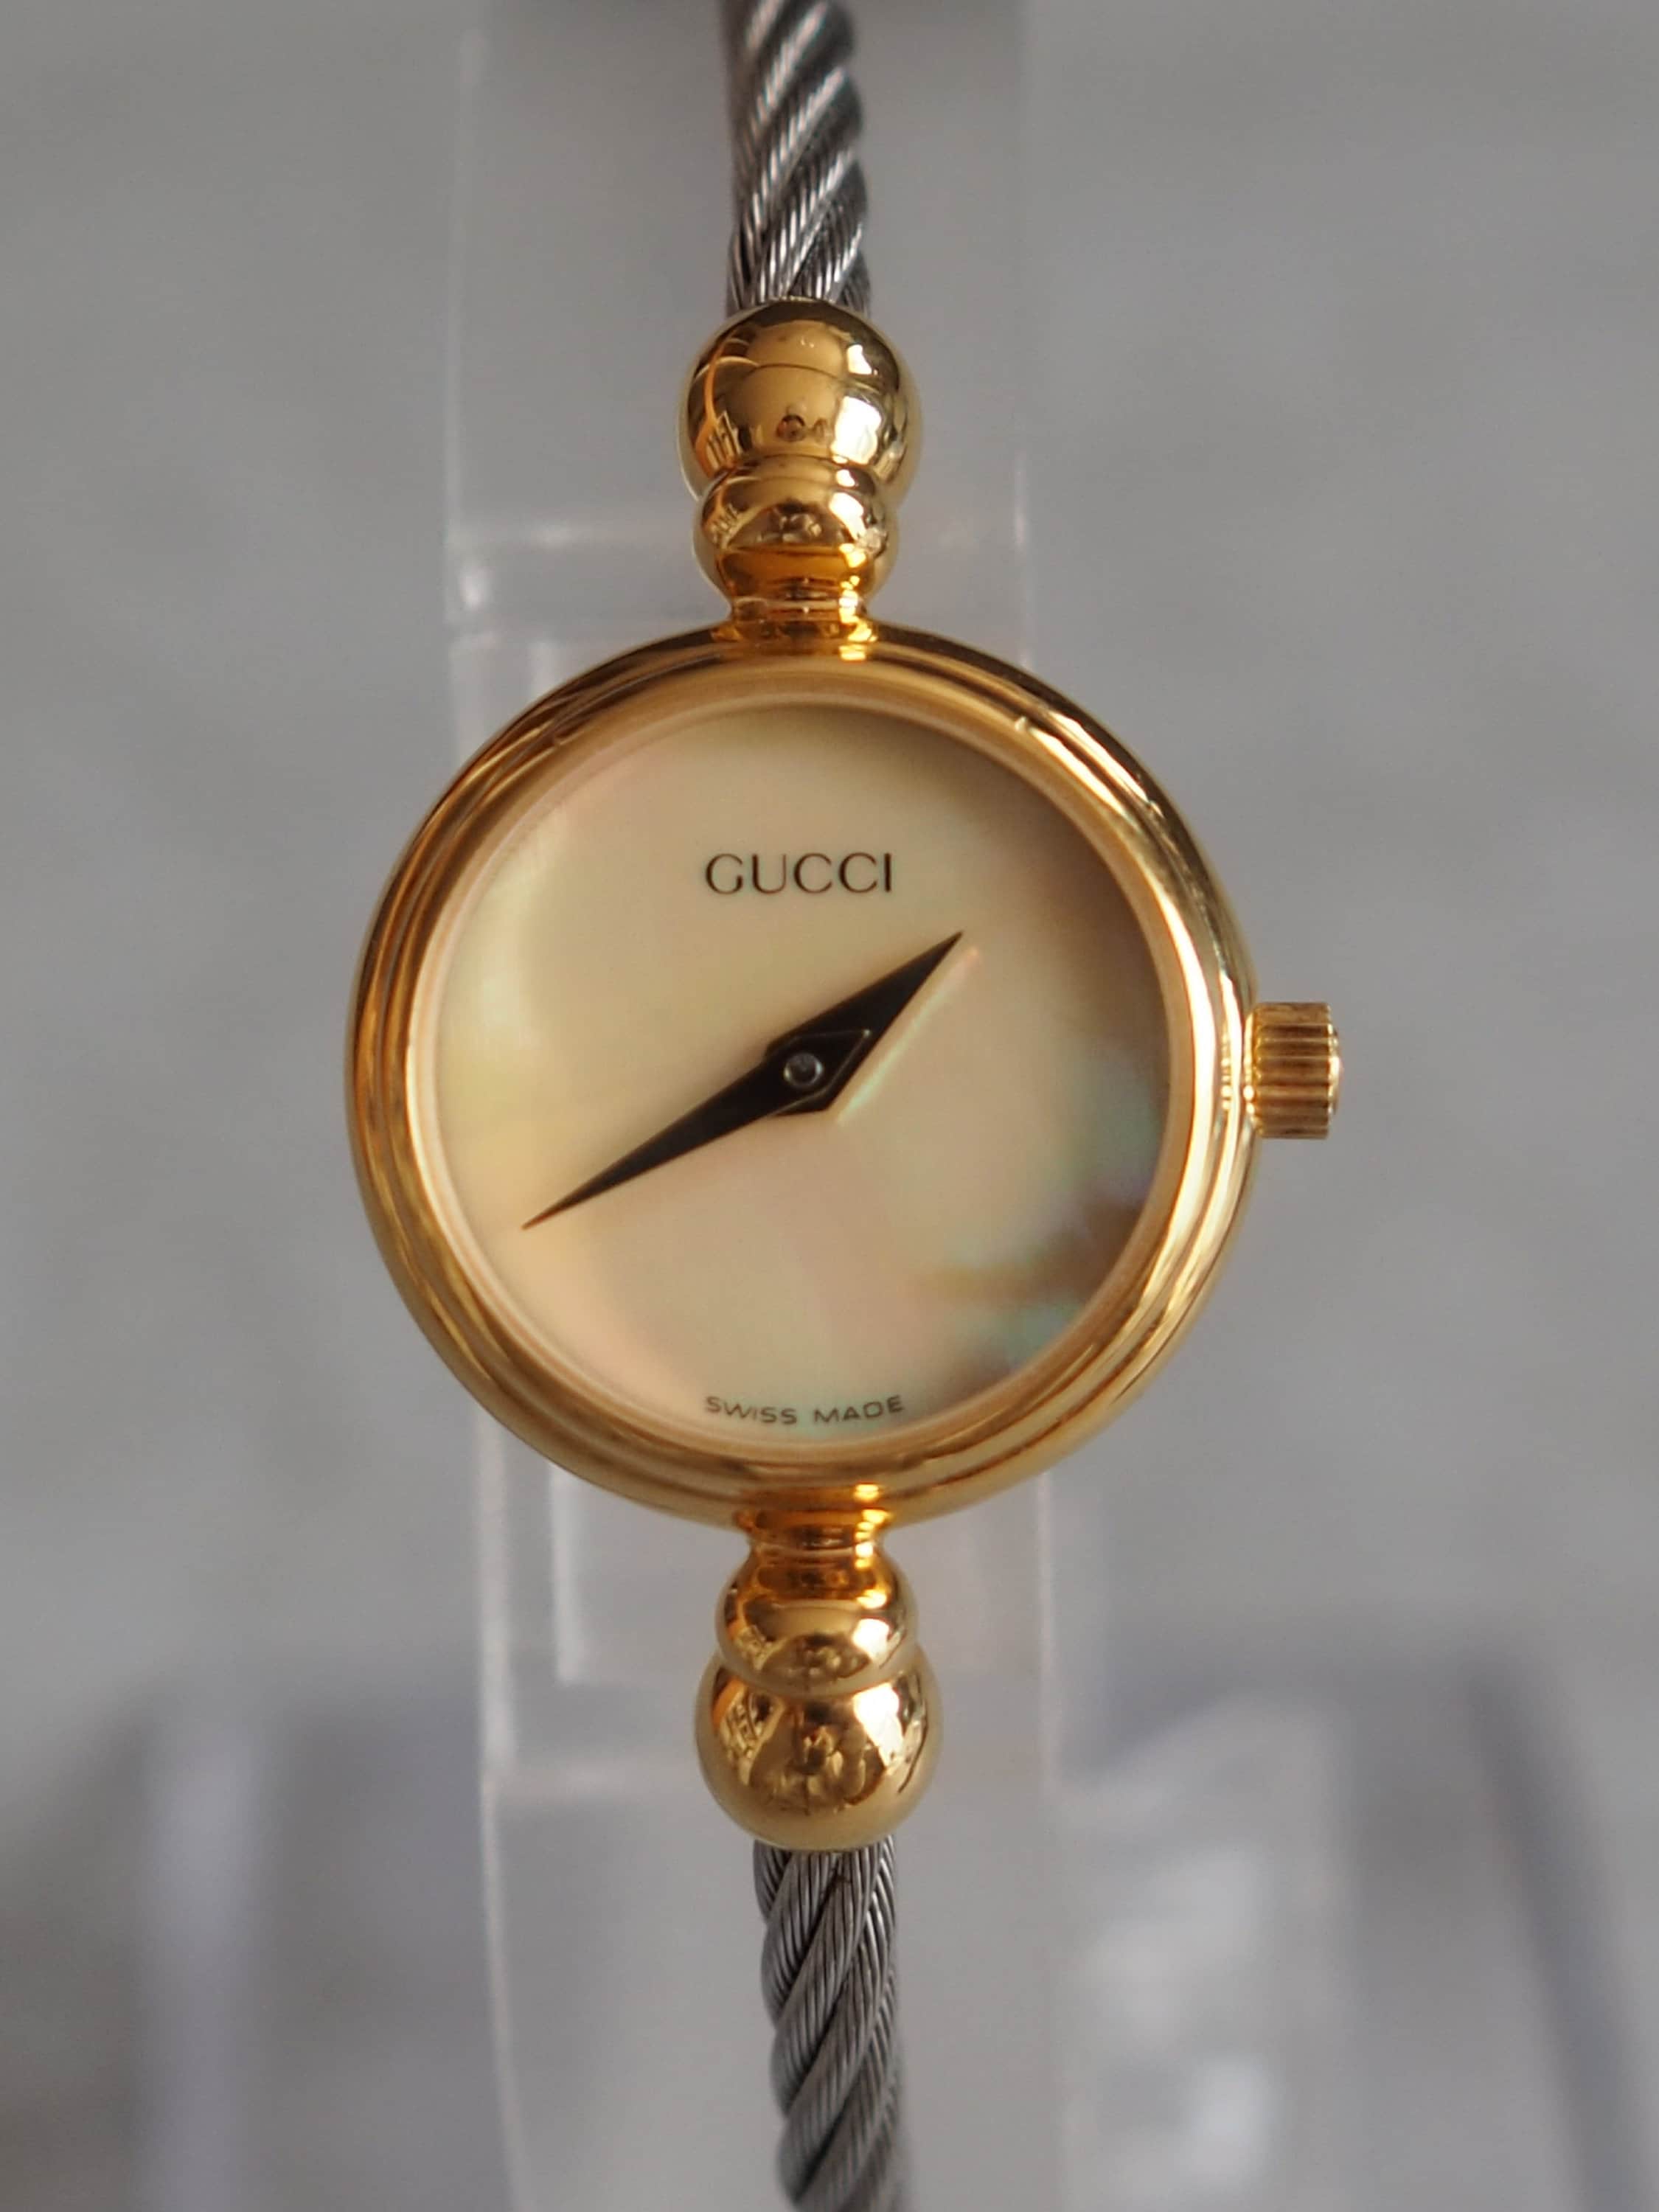 GUCCI Shell Bangle Watch Wristwatch Gold Silver Metal Vintage Authentic